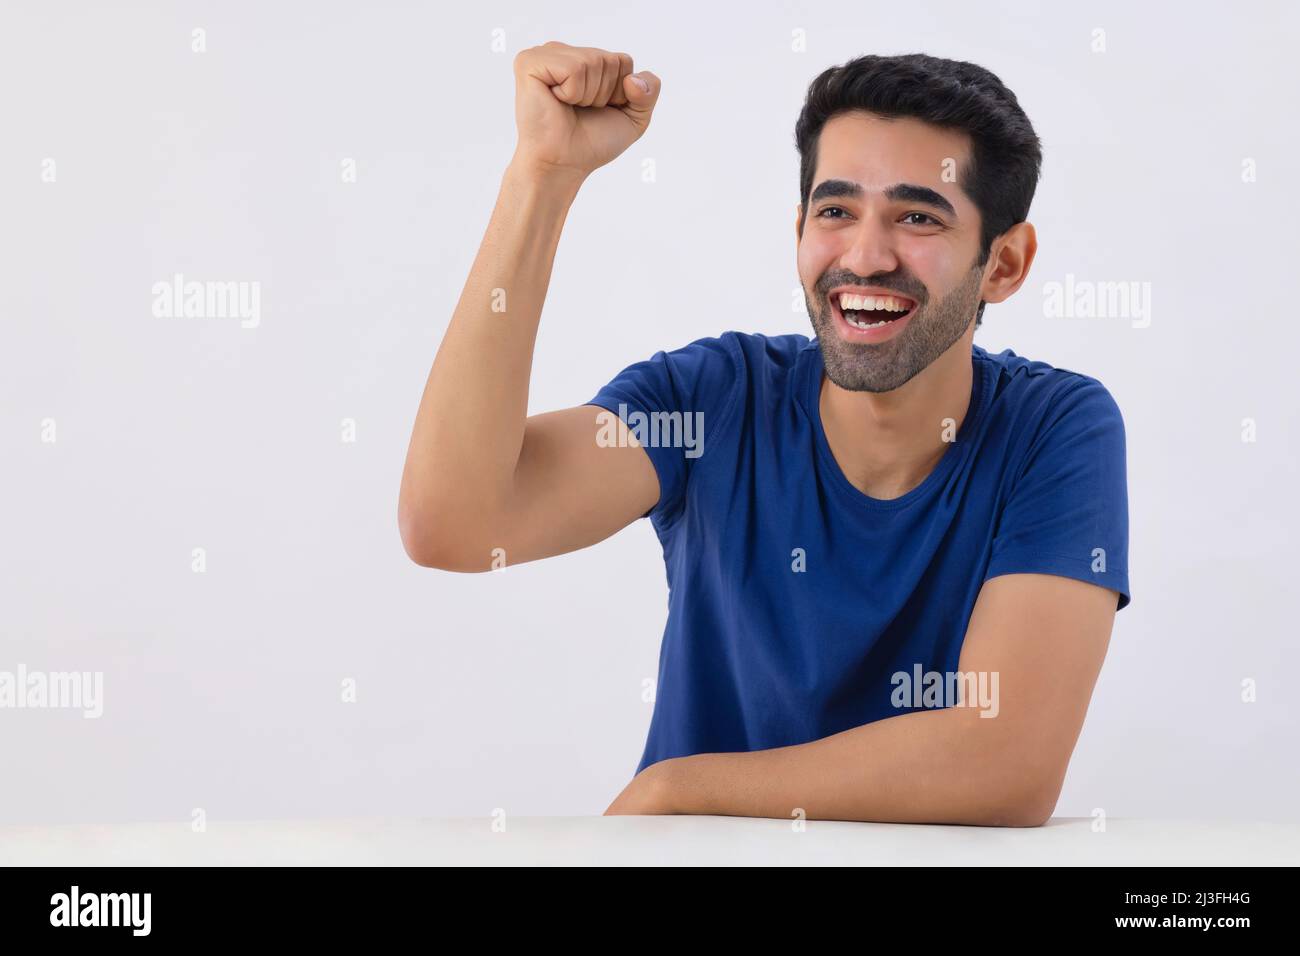 Portrait of a young man celebrating victory by raising his fist Stock Photo